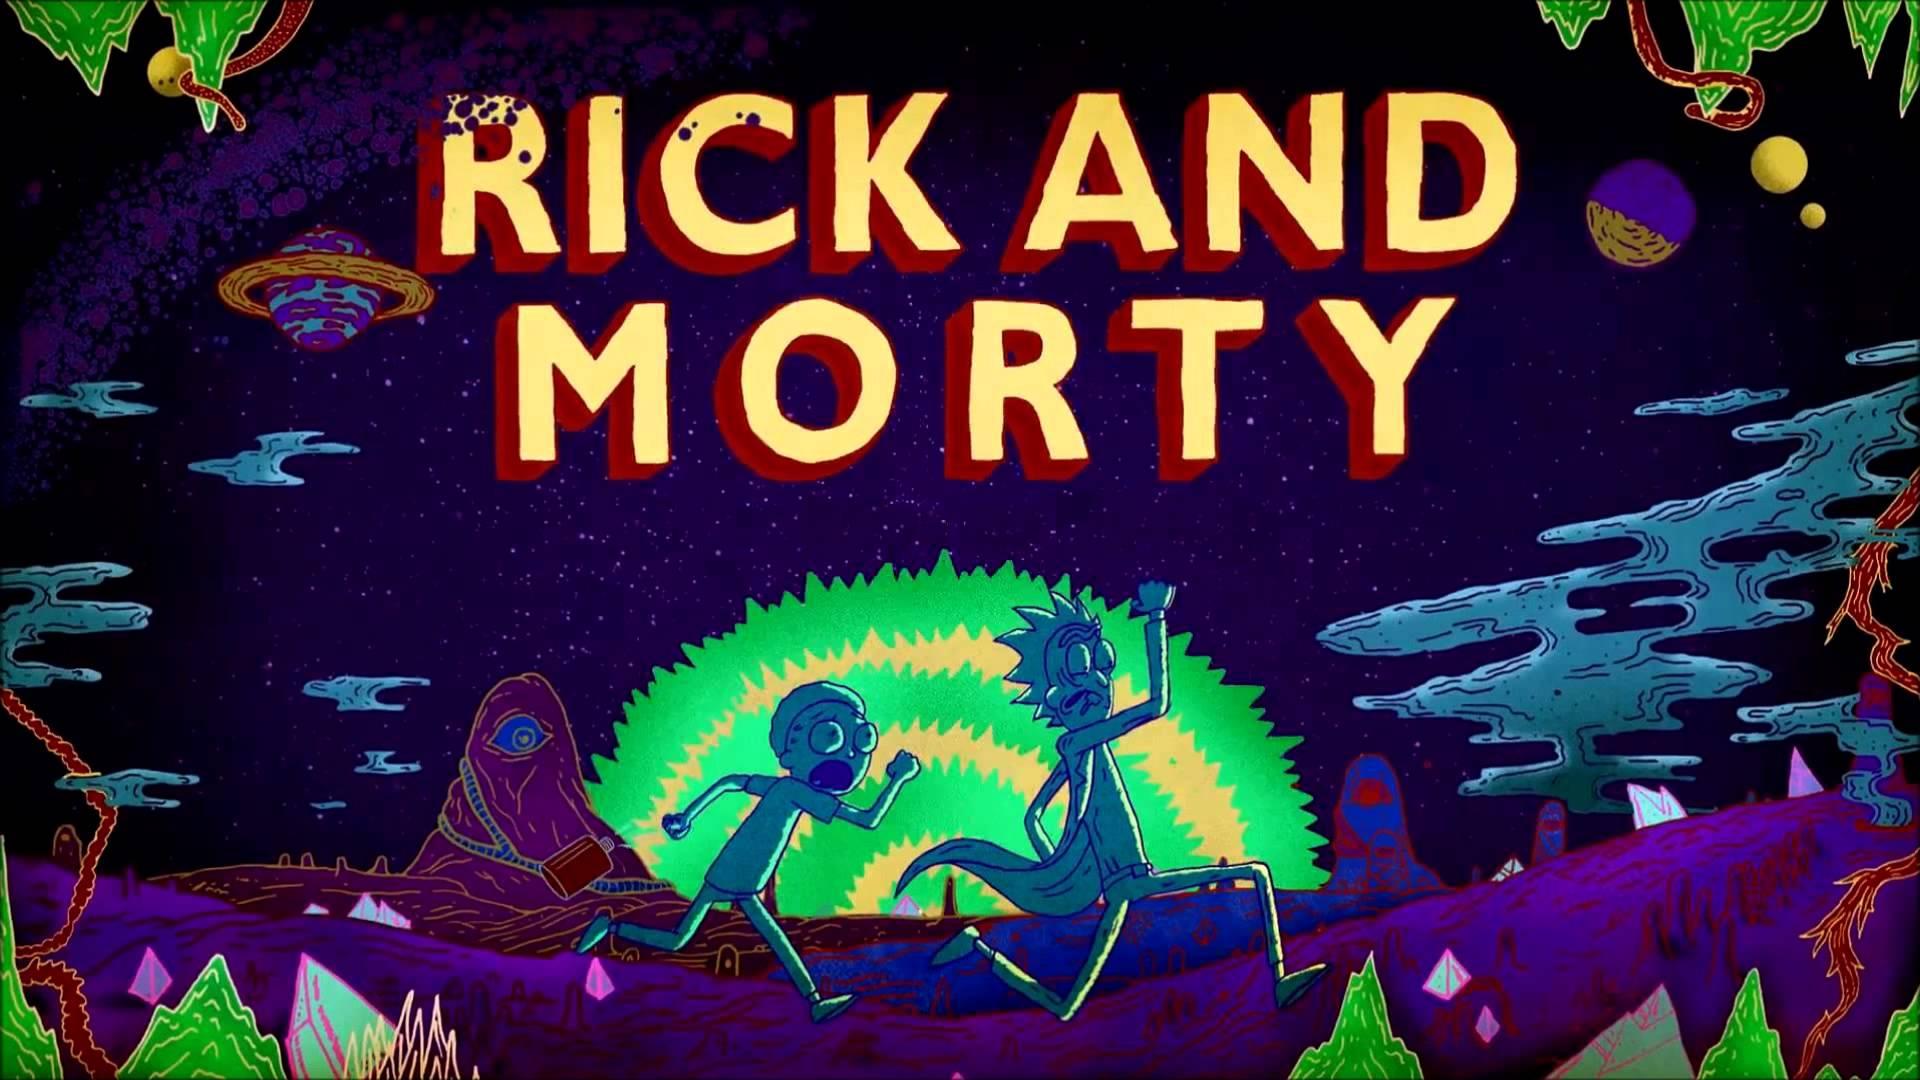 Rick and morty porn in Harare